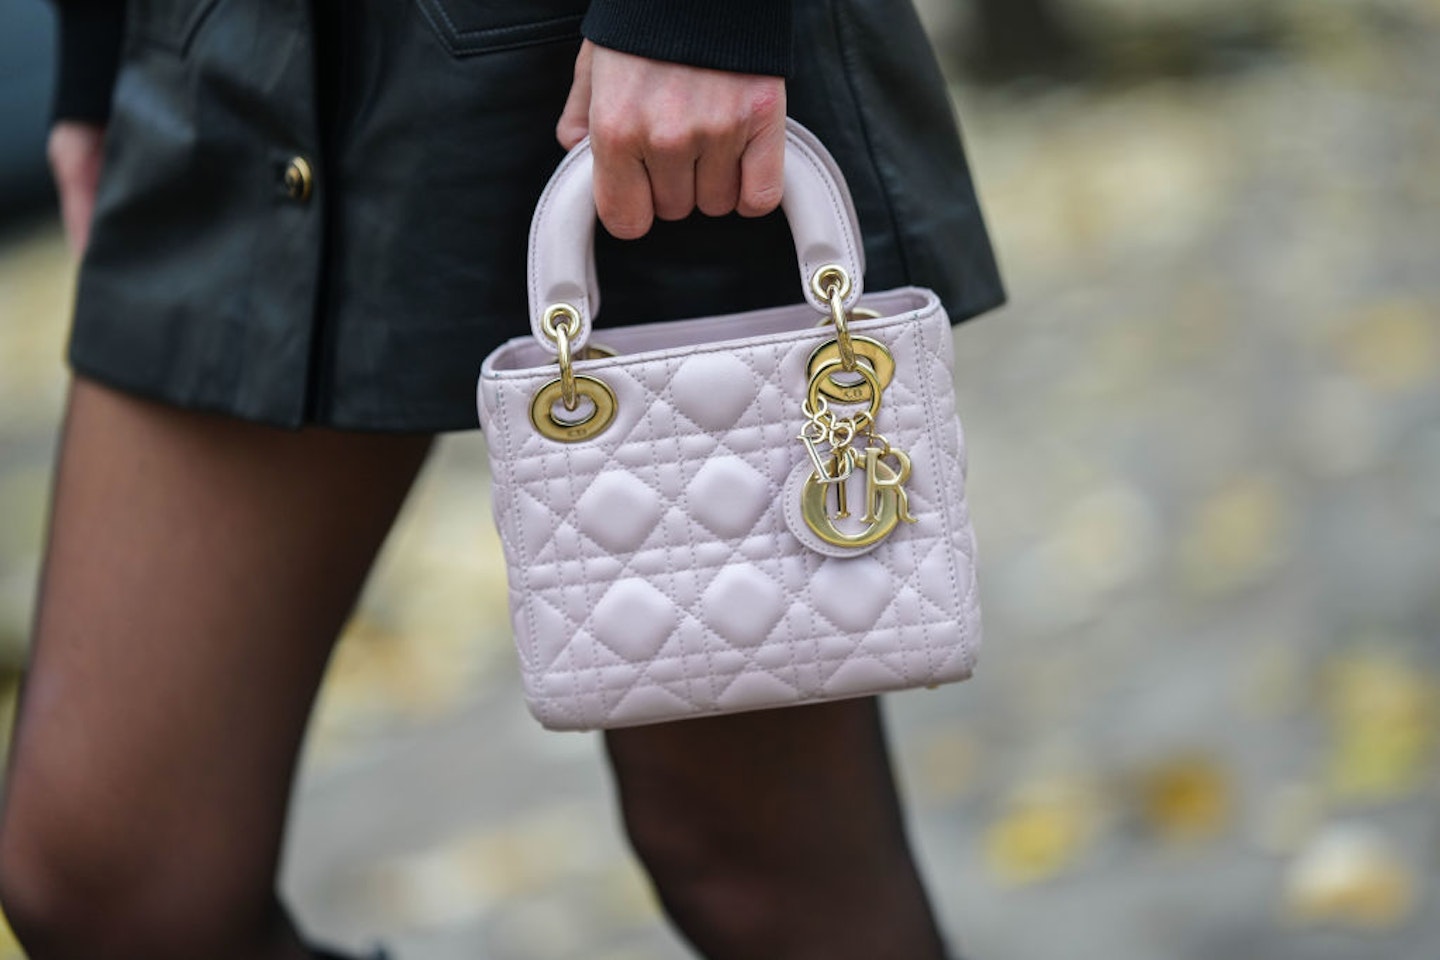 The best investment designer handbags to buy, from Chanel to Dior